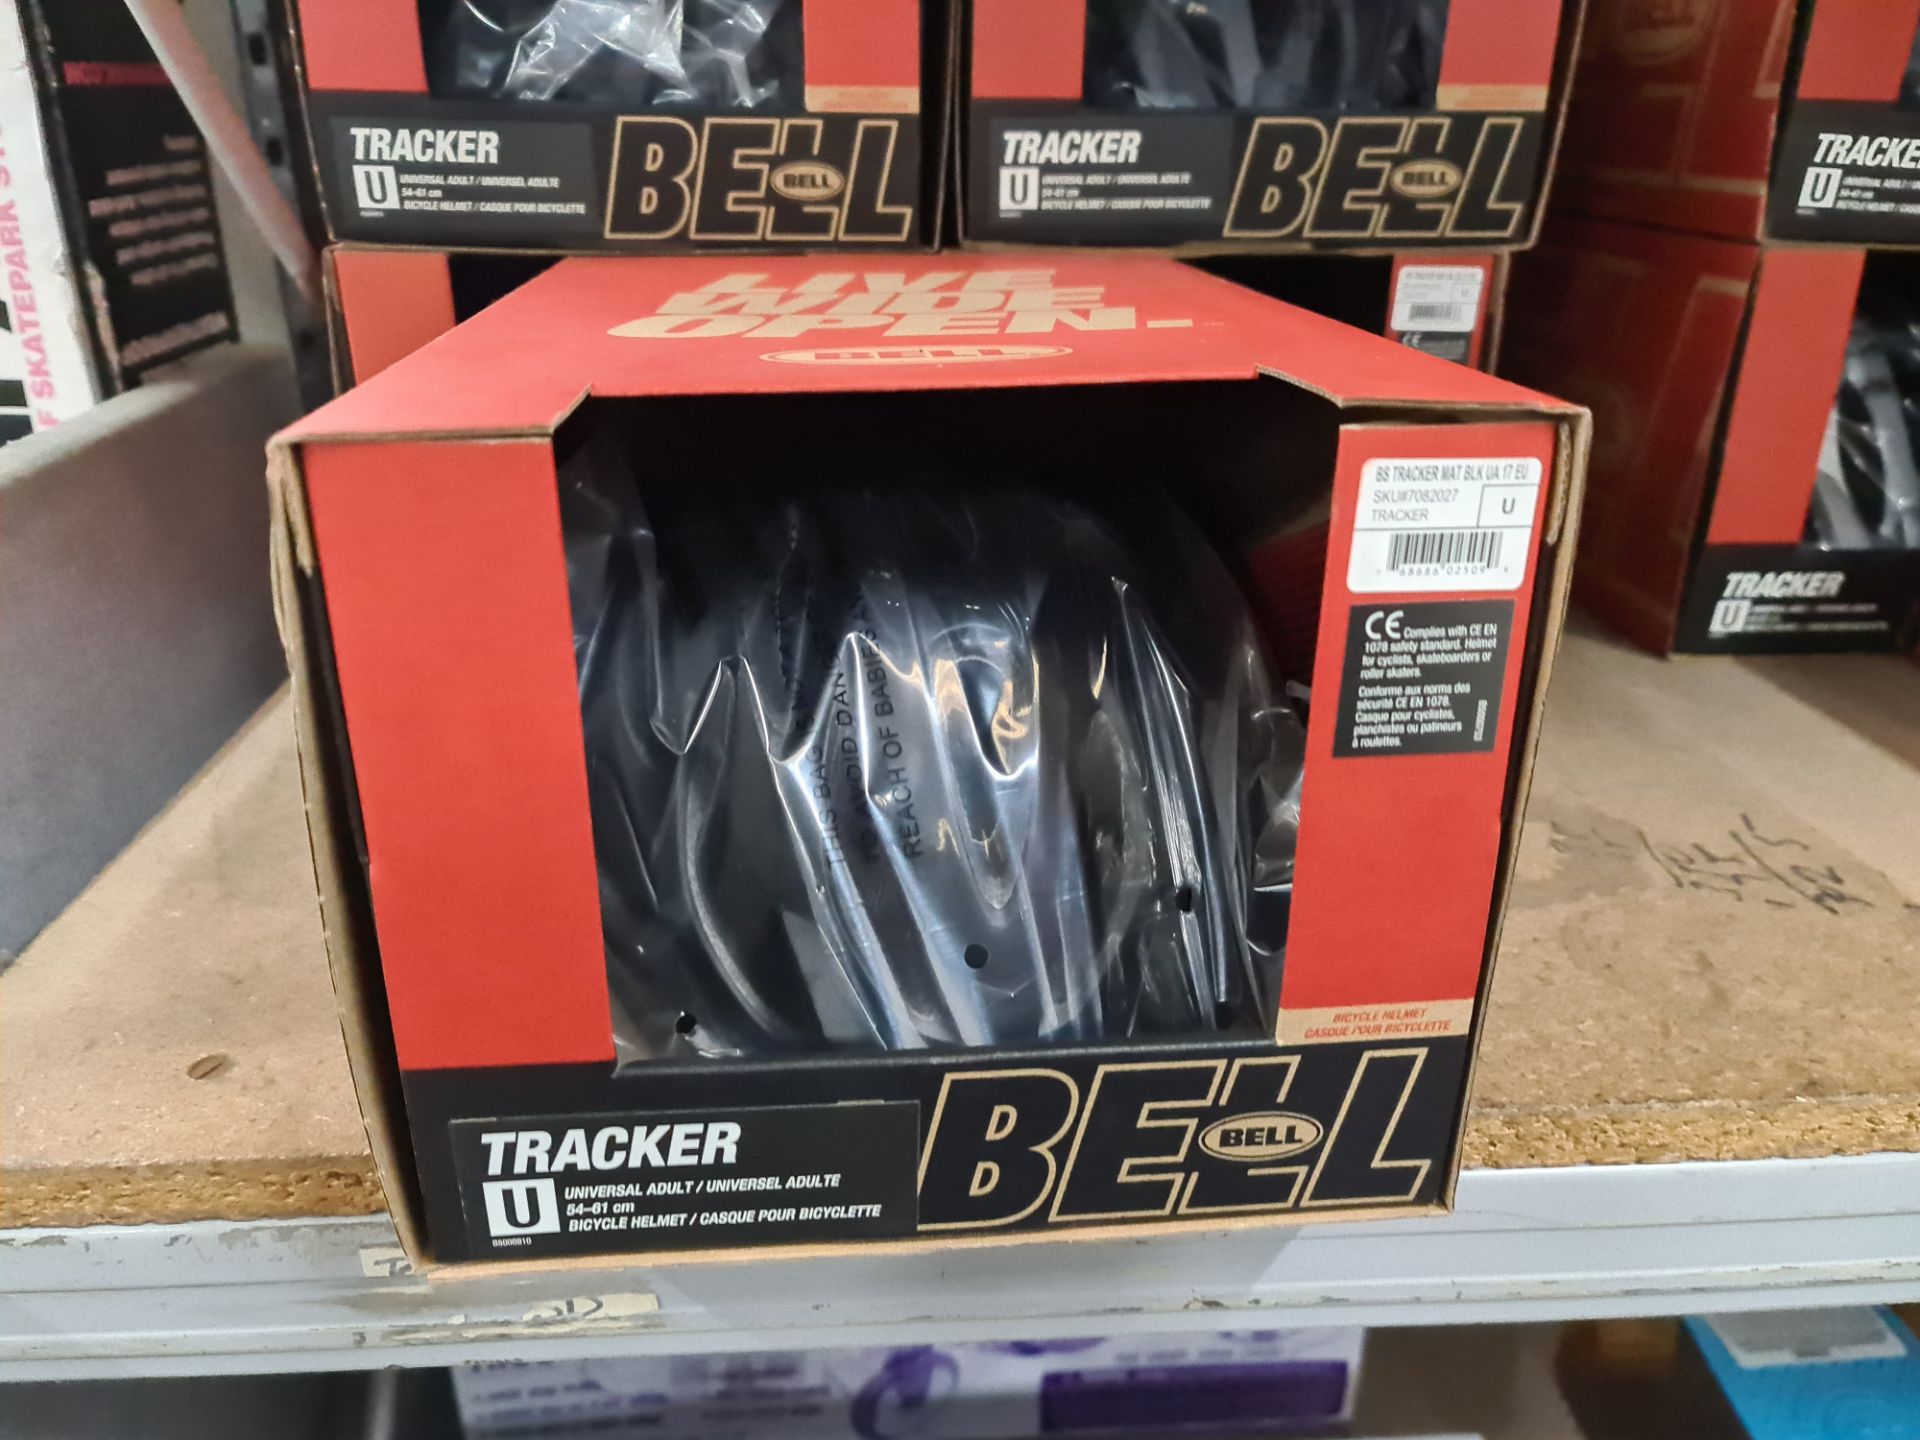 5 off Bell tracker bicycle helmets, all sized U (universal adult), all individually boxed - Image 2 of 4